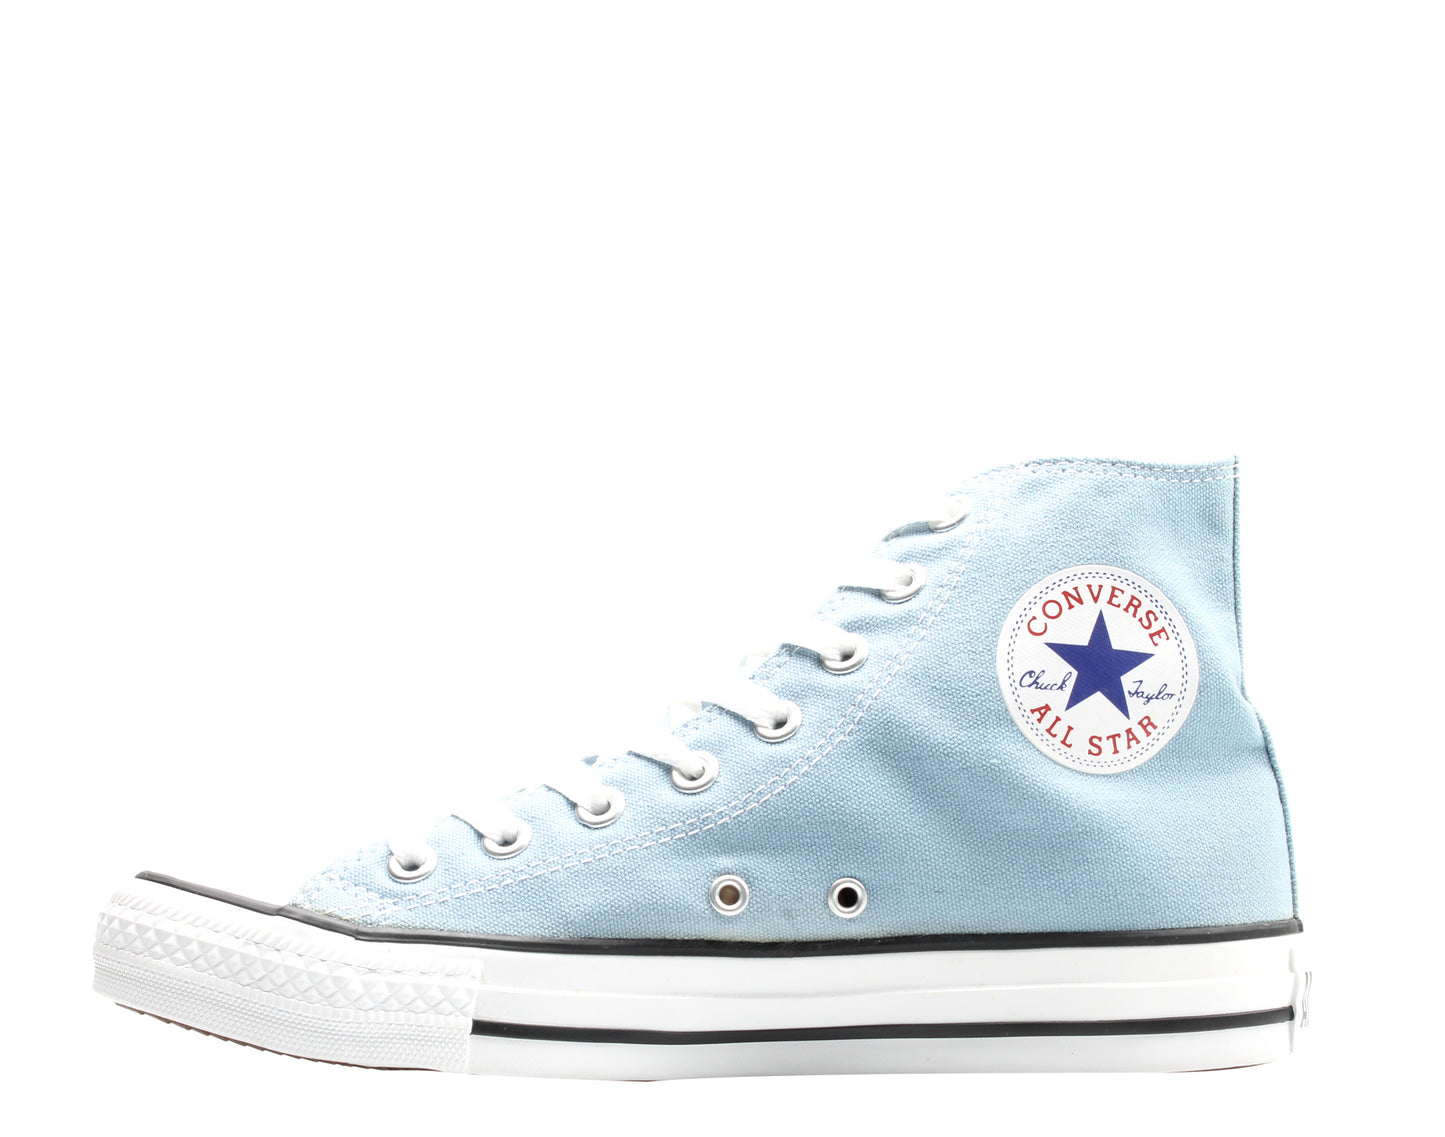 Converse Chuck Taylor All Star Dusk Blue High Top Sneakers 15951